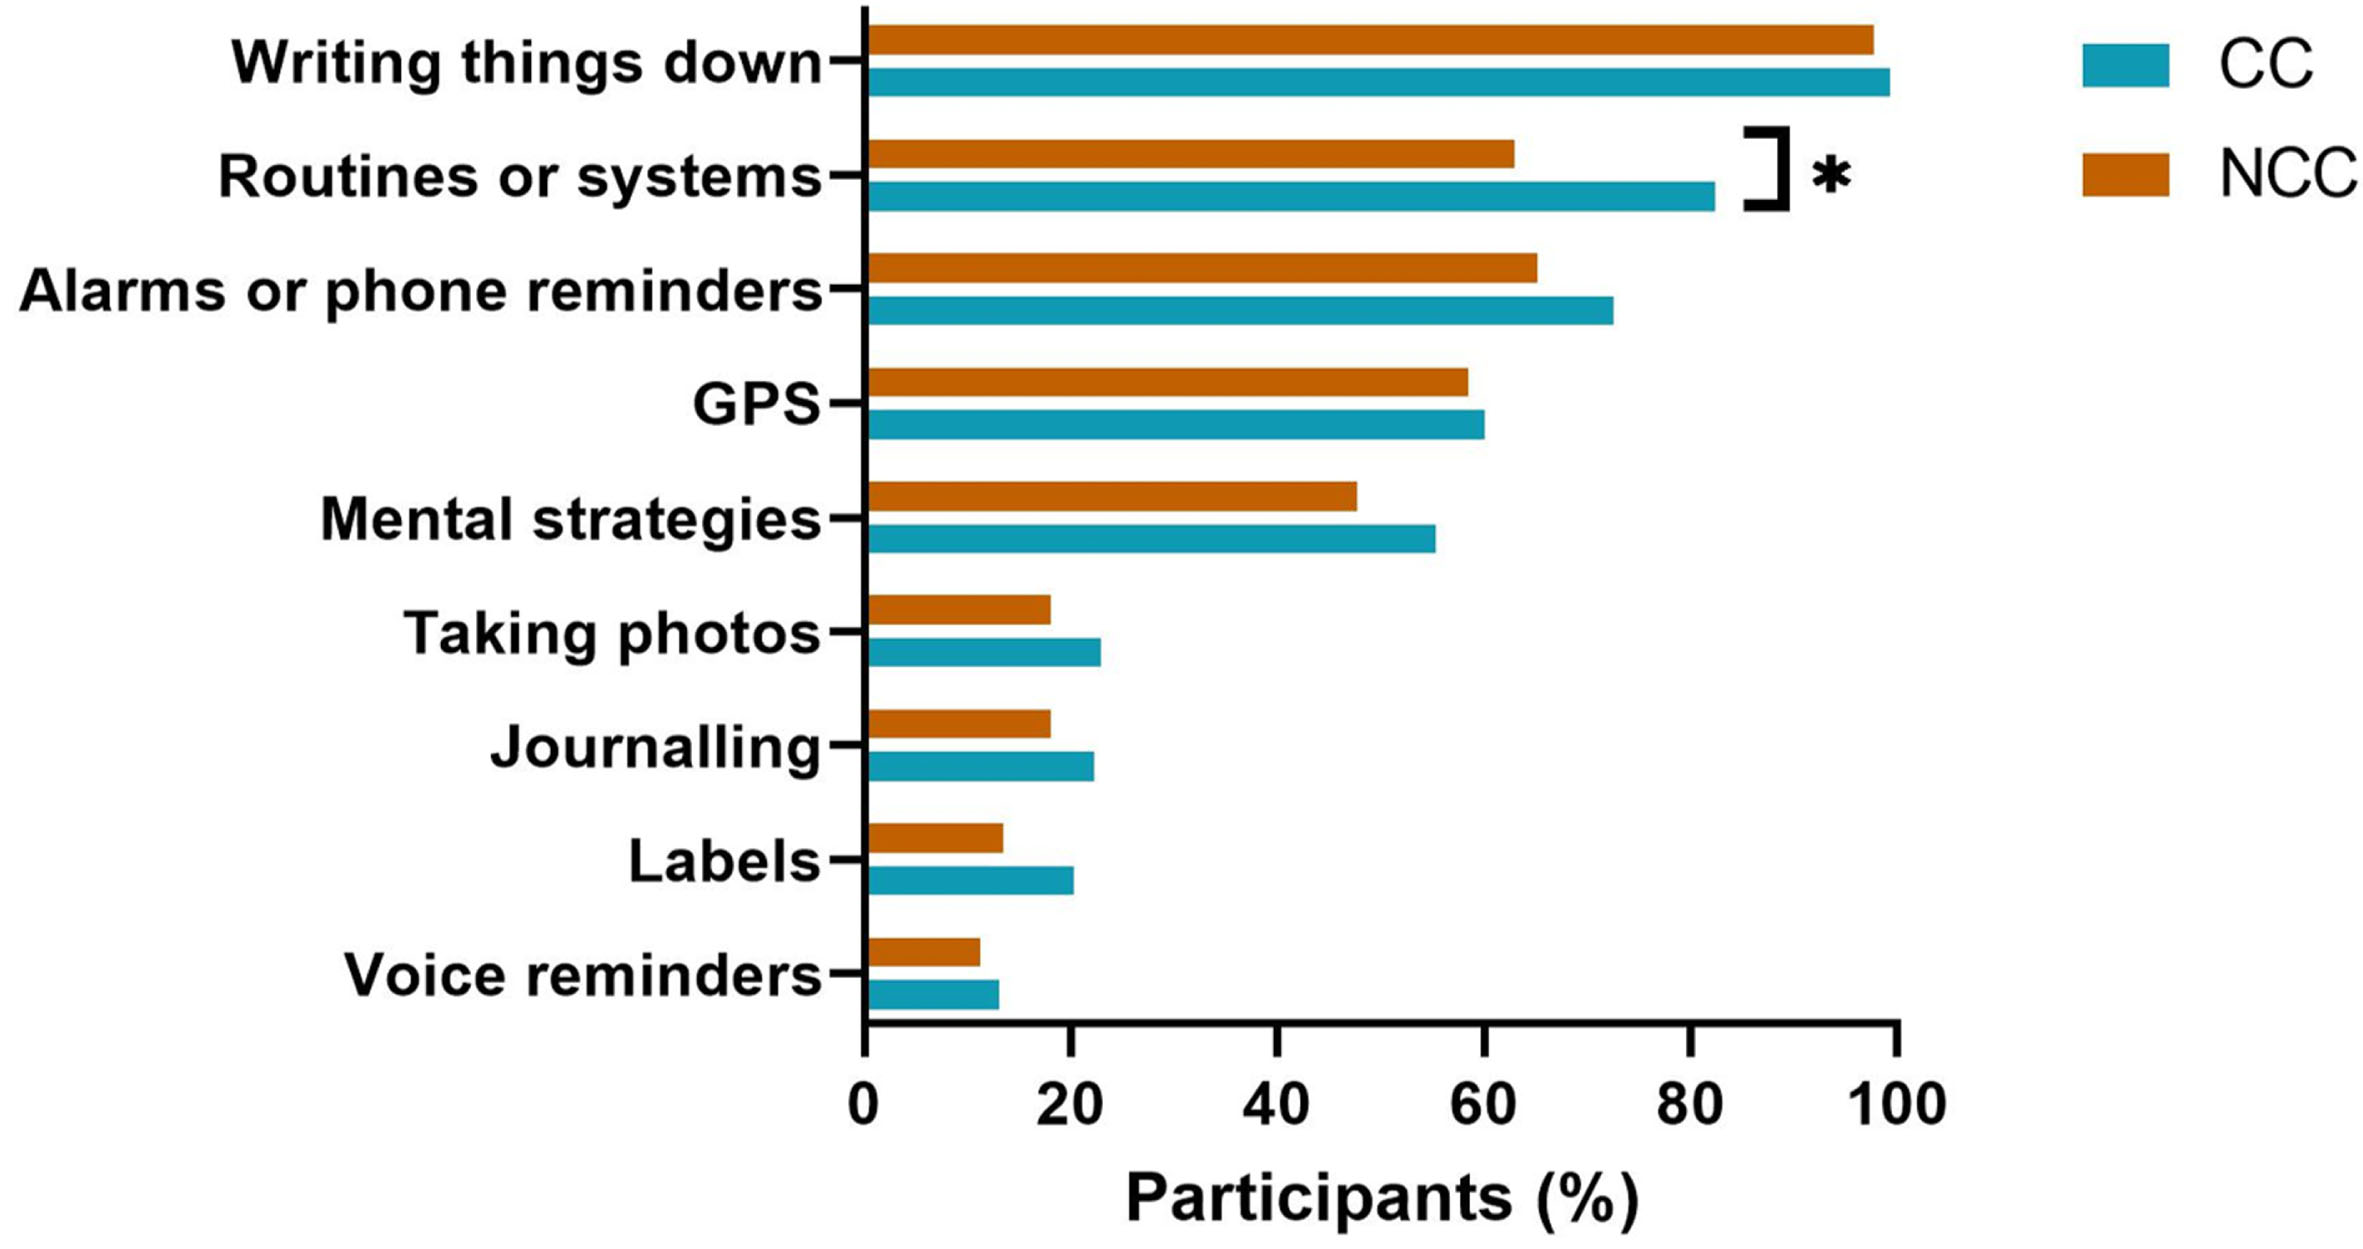 Day-To-Day Use of Memory Strategies Compared by Cognitive Status. *Cognitive group comparisons significant at p < 0.001.